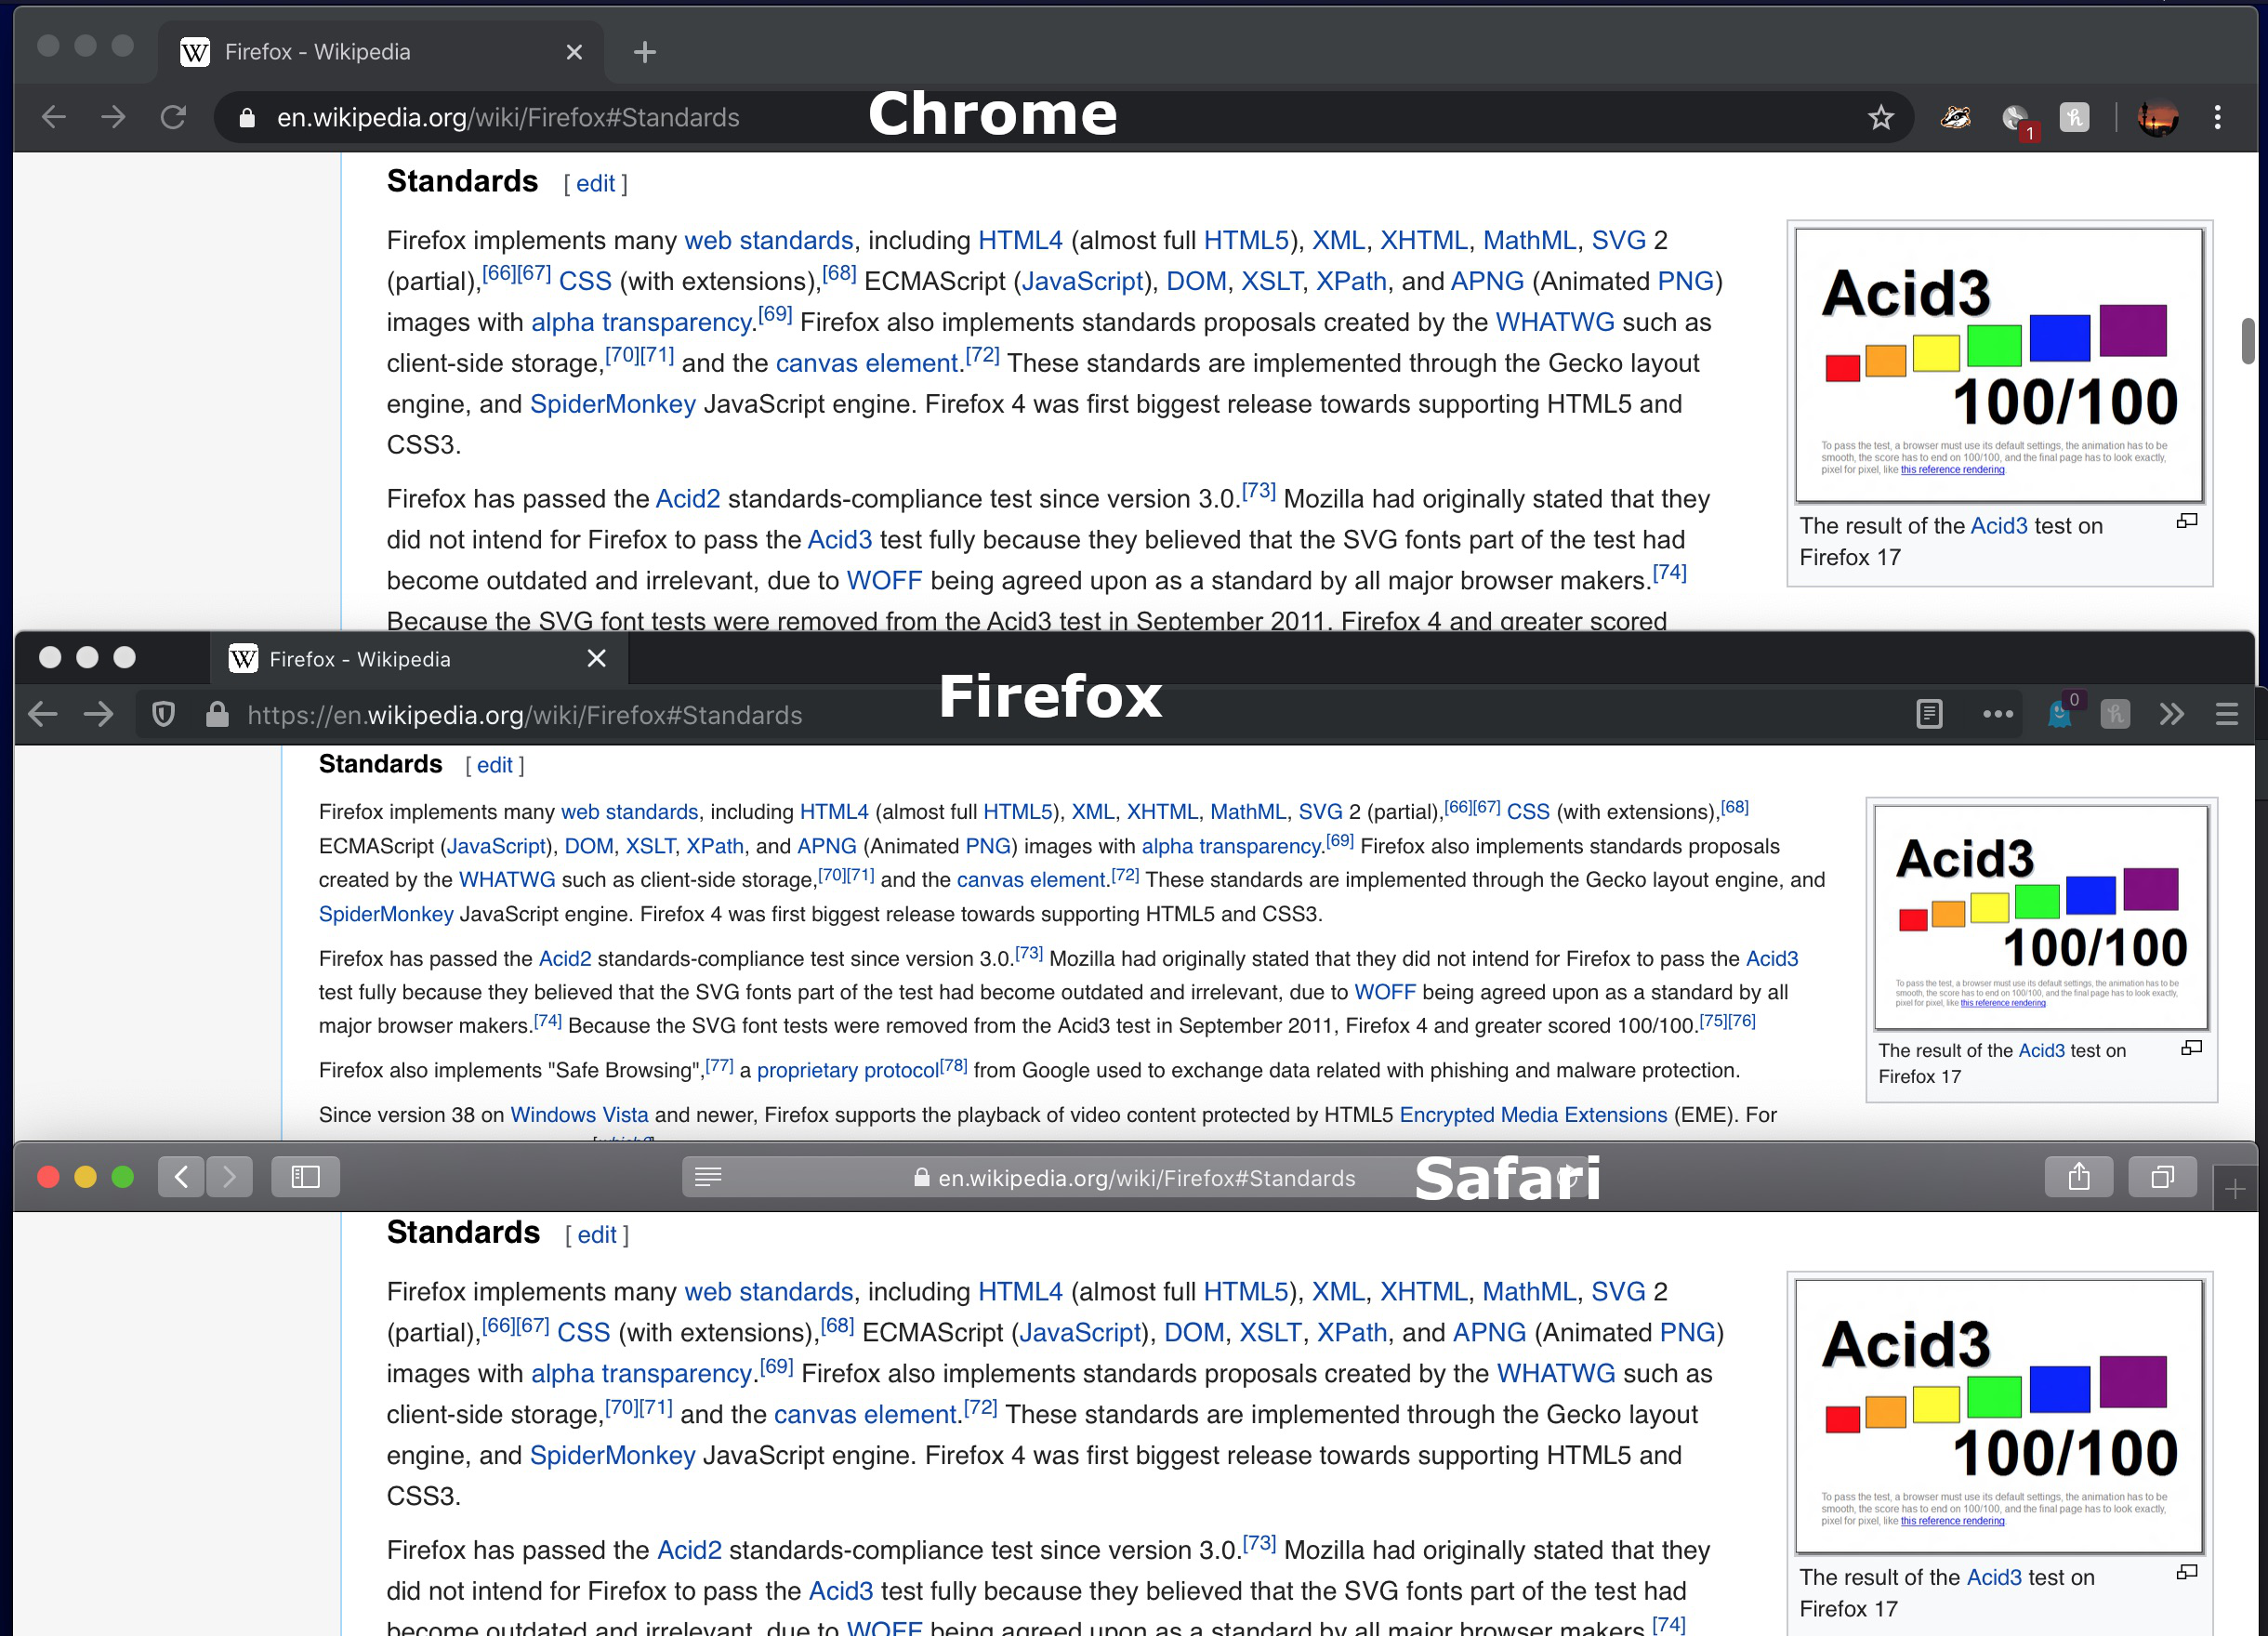 How to change Default Font & Size in Chrome, Edge and Firefox